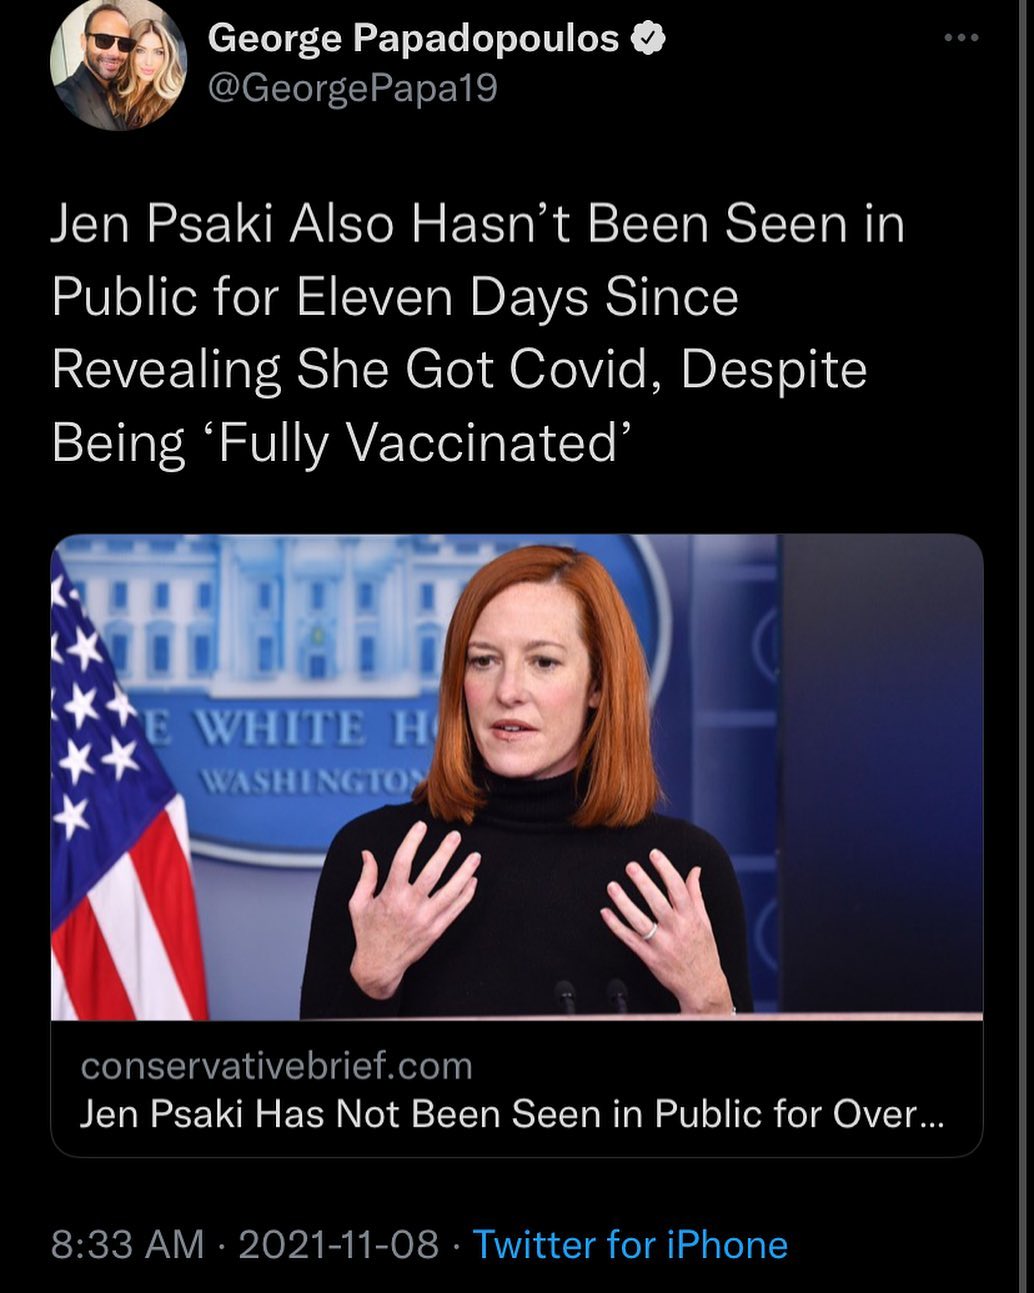 You are currently viewing Jen Psaki Also Hasn’t Been Seen in Public for Eleven Days Since Revealing She Got Covid, Despite Being ‘Fully Vaccinated’